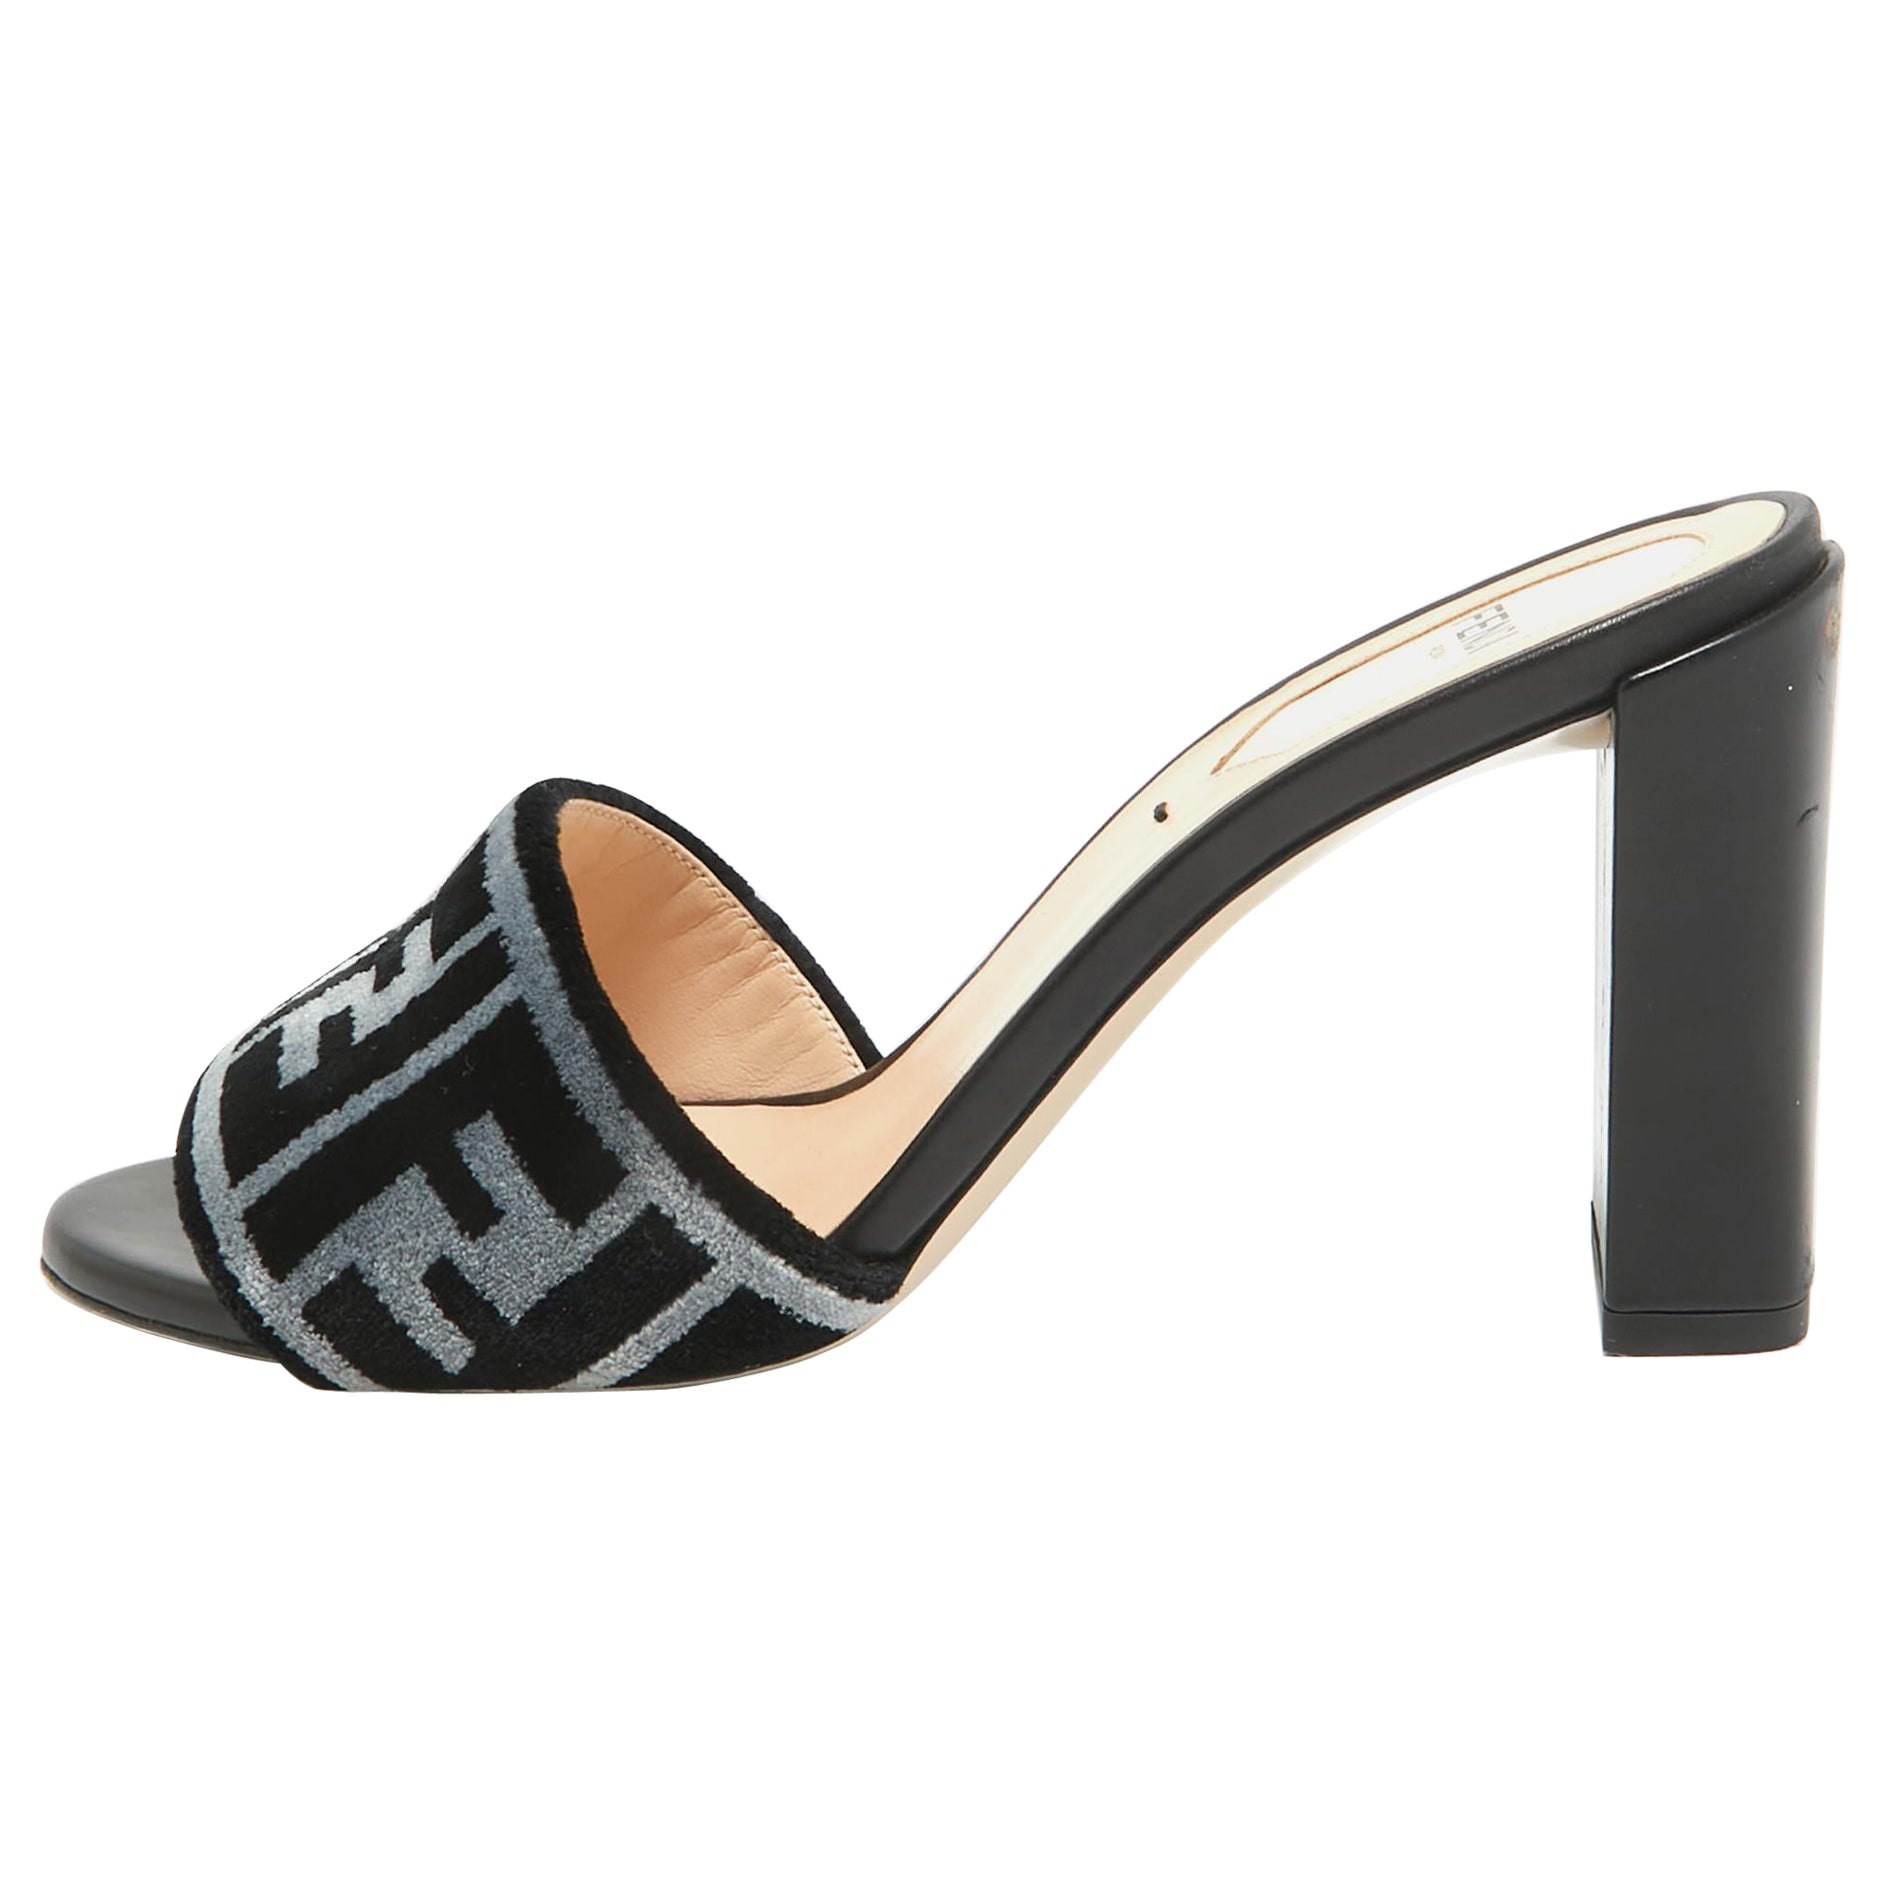 How heavy are Fendi slip-on shoes?